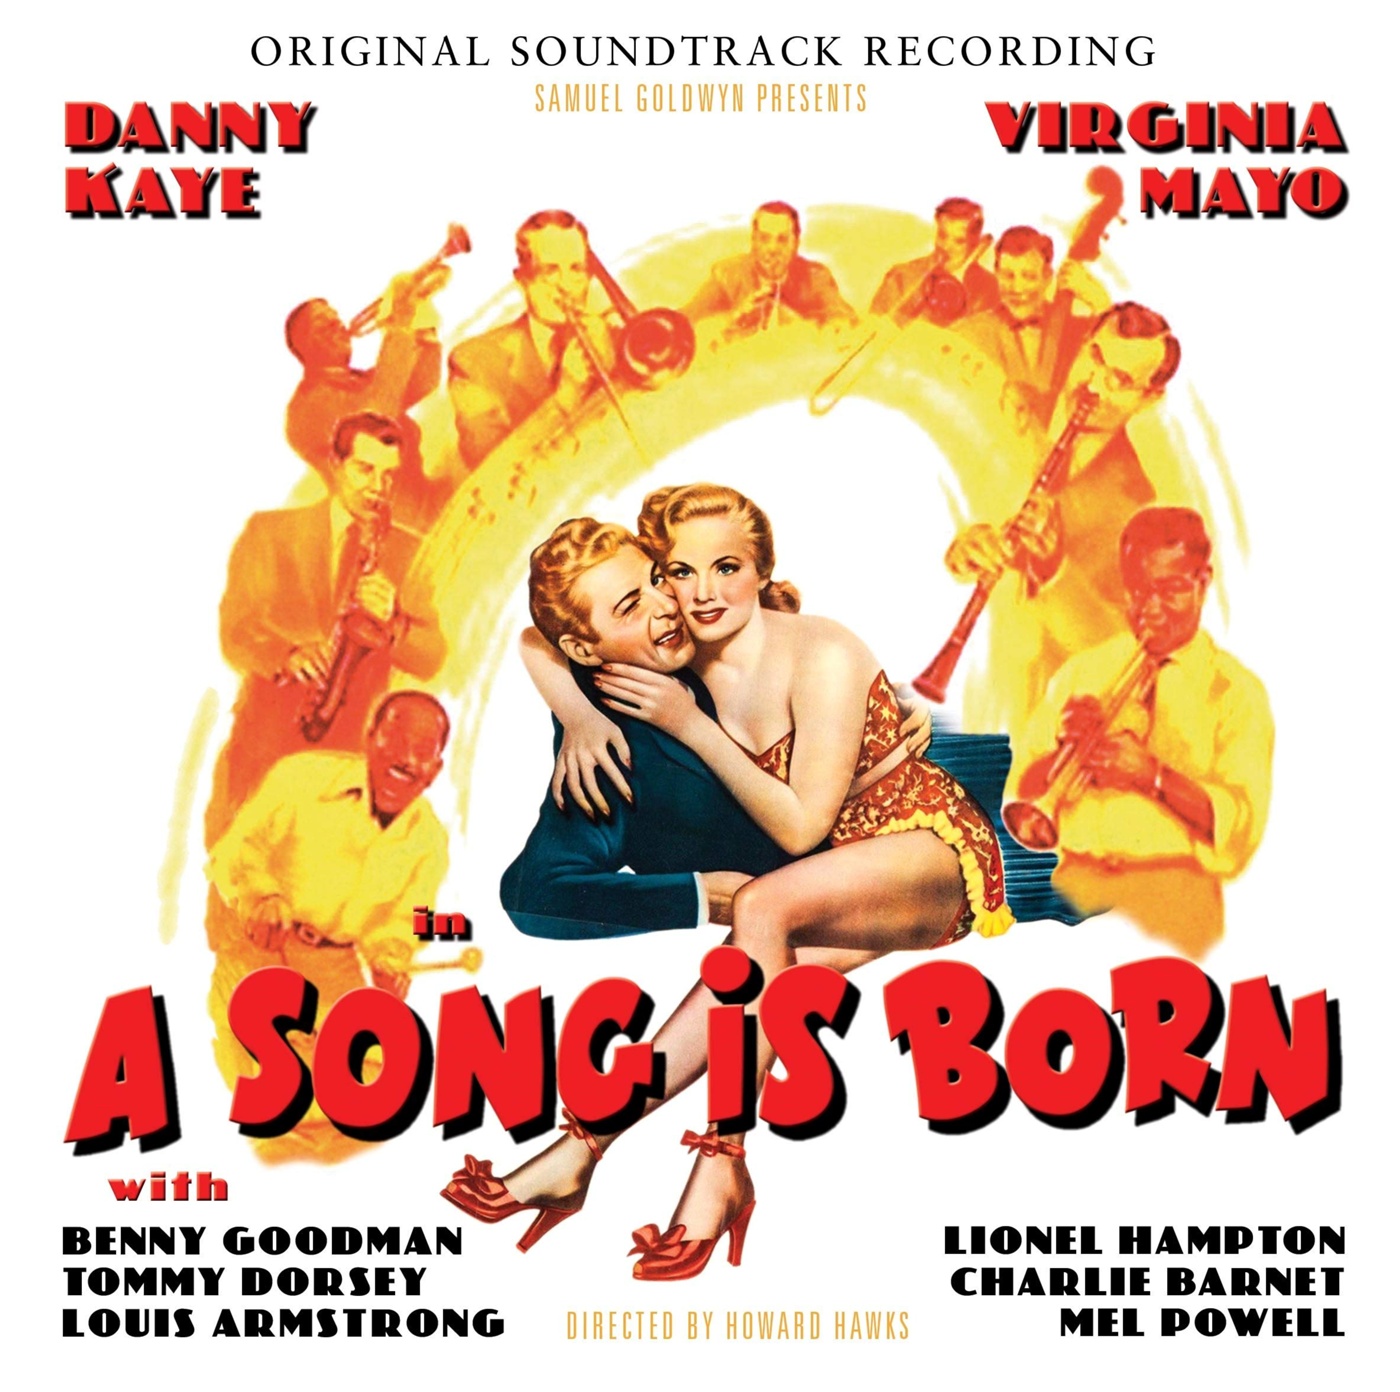 A Song is born. Born soundtrack